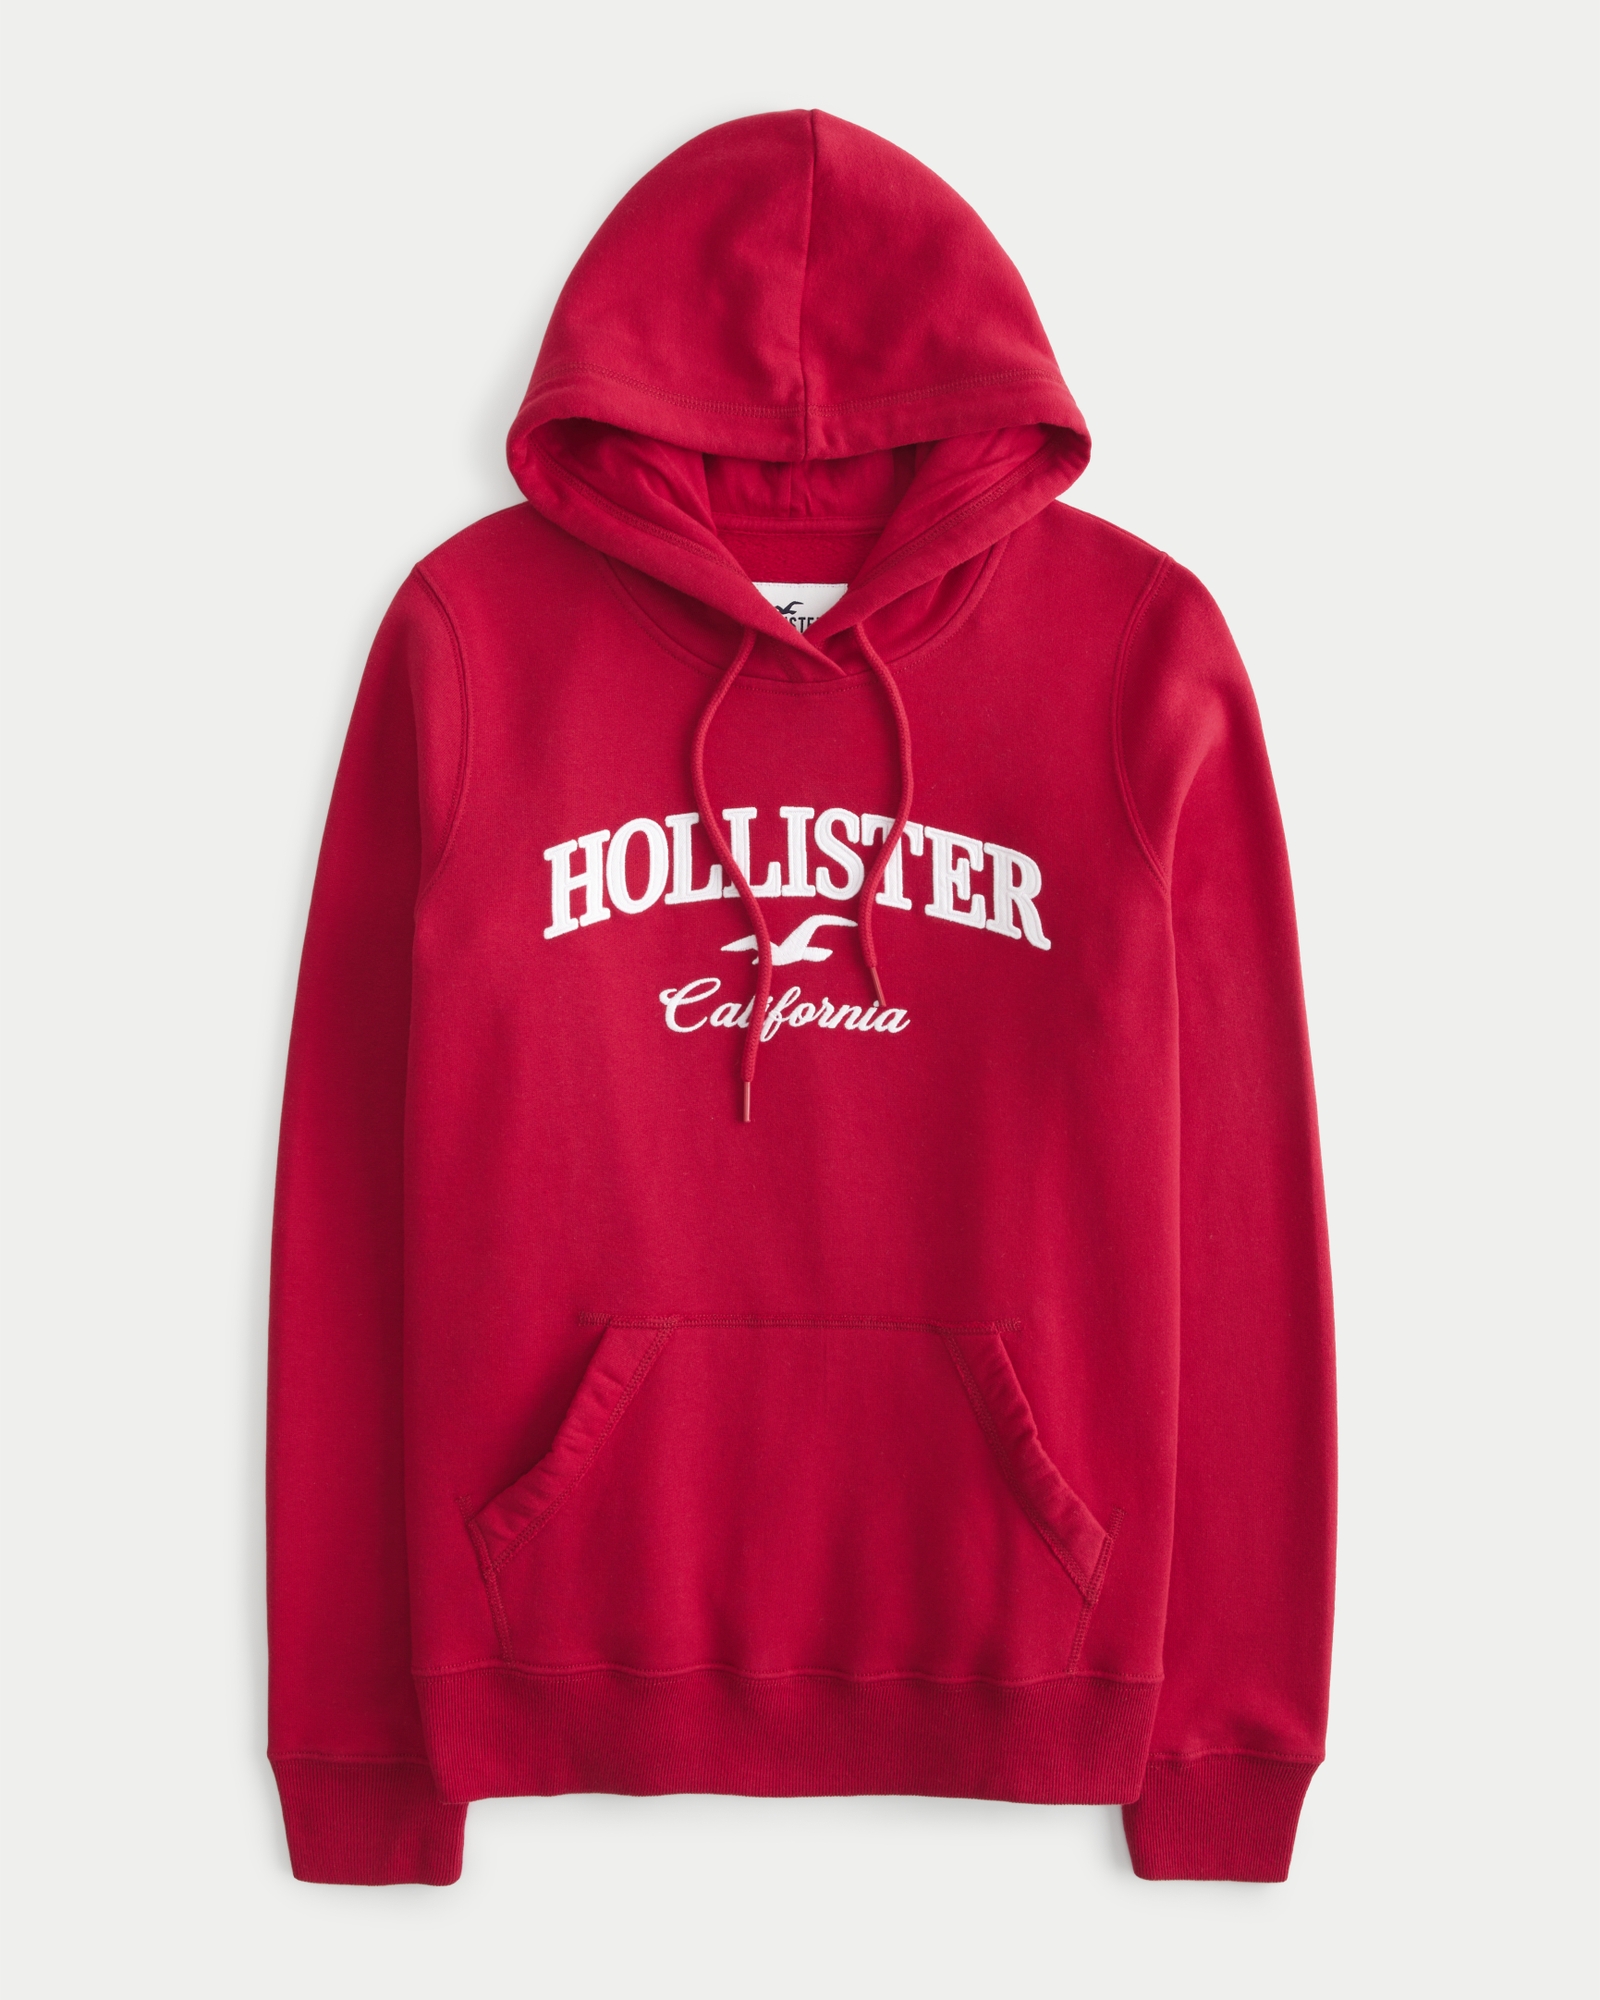 Hollister Hoodie Sweatshirt Red White Blue Stripe Men’s Small Spell Out Logo